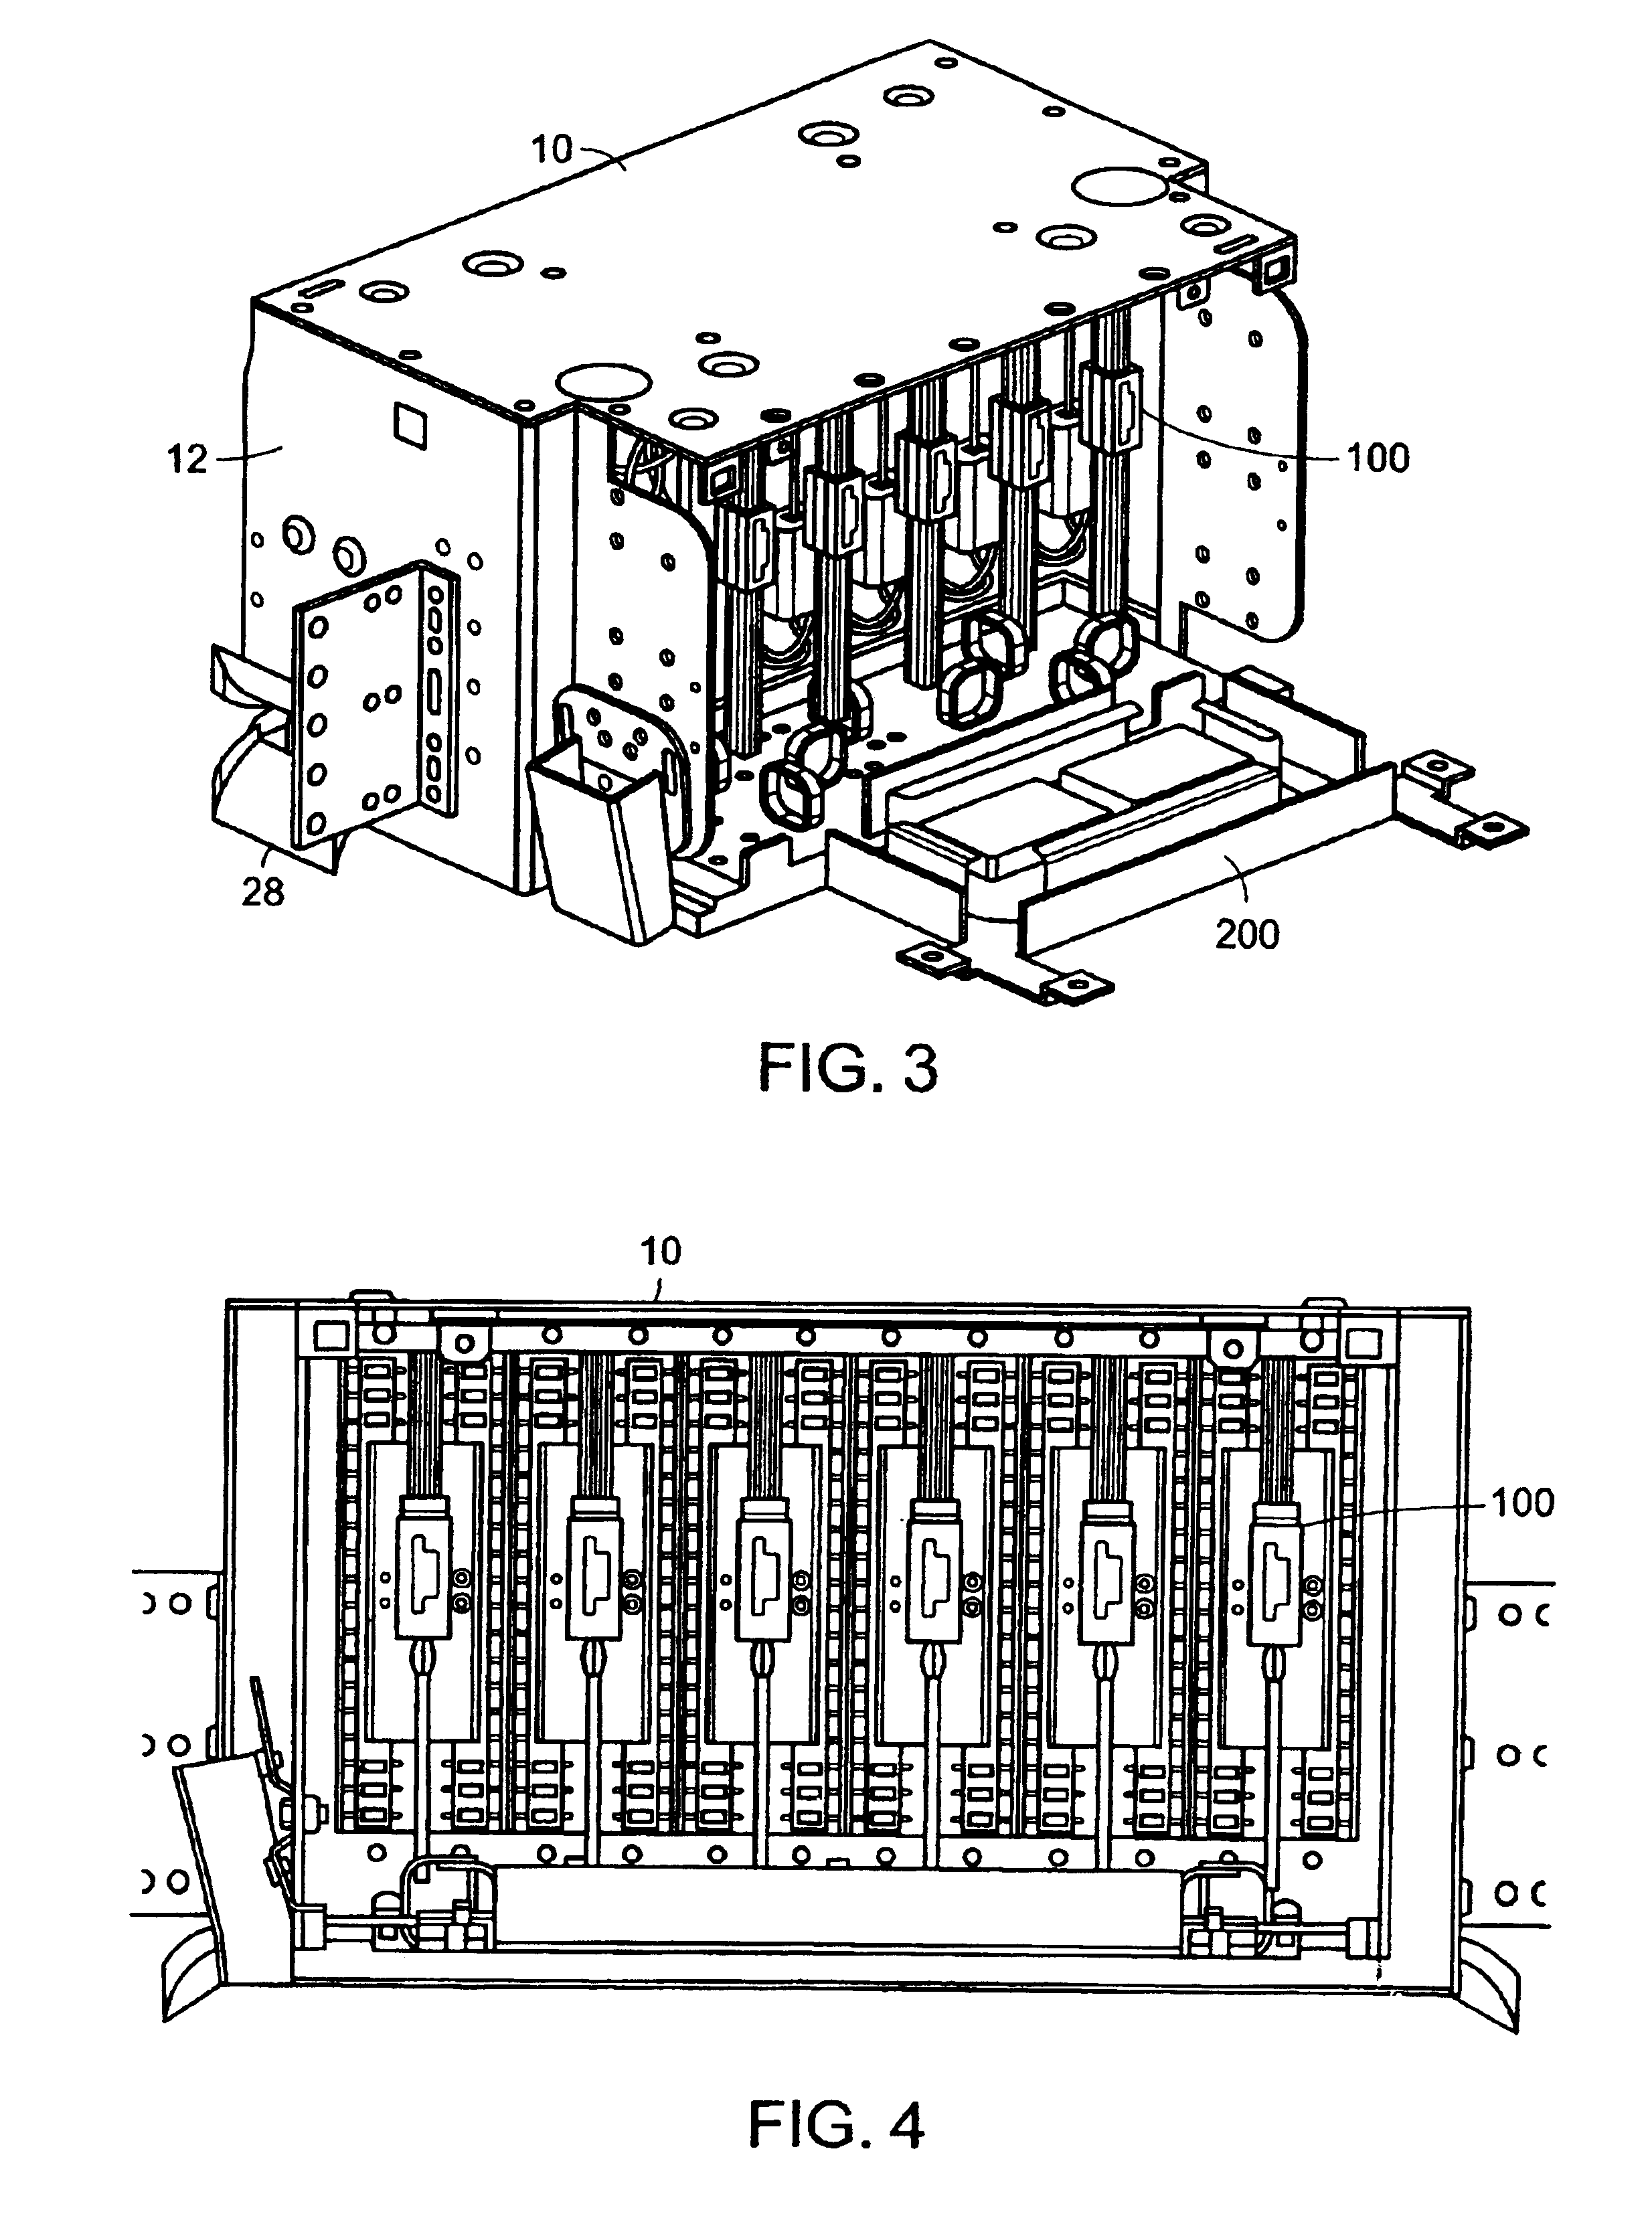 Optical fiber enclosure system using integrated optical connector and coupler assembly